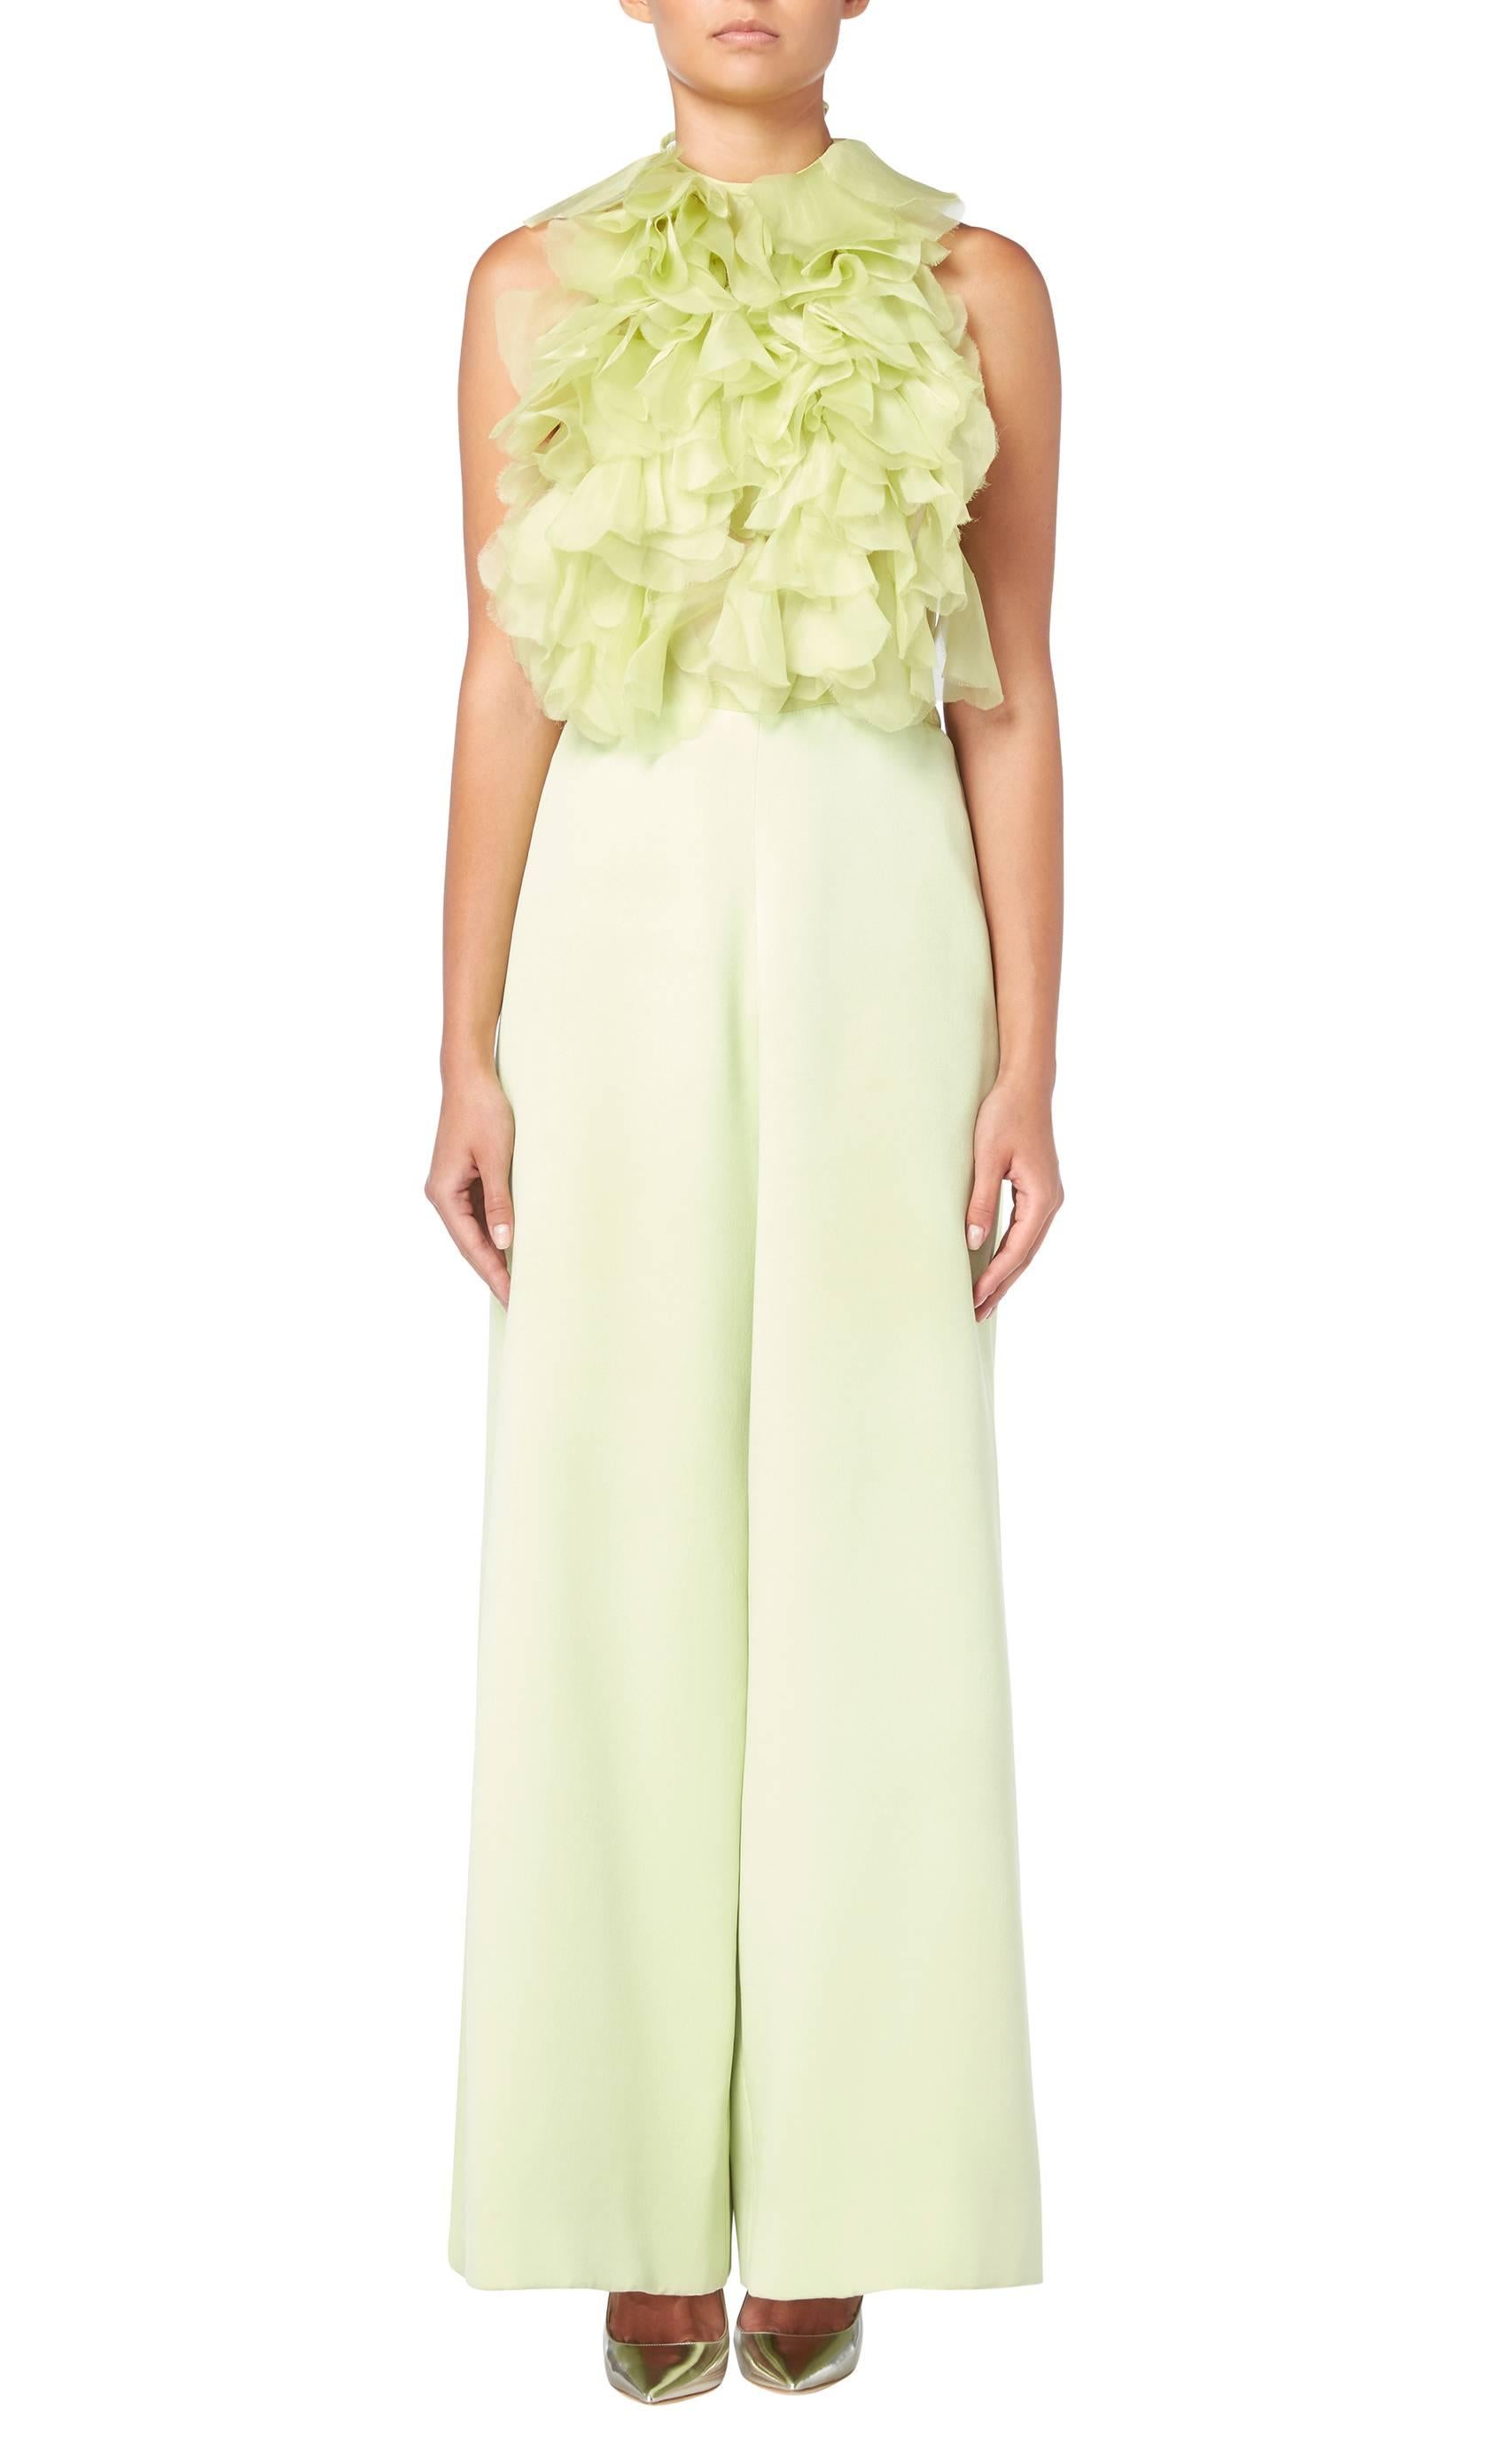 This stunning haute couture jumpsuit by Lancetti will make a fabulous alternative to a dress for evening events. Constructed in citrus green silk, the halter neck jumpsuit is backless and features organza petals to the bust, creating a ruffled bib.